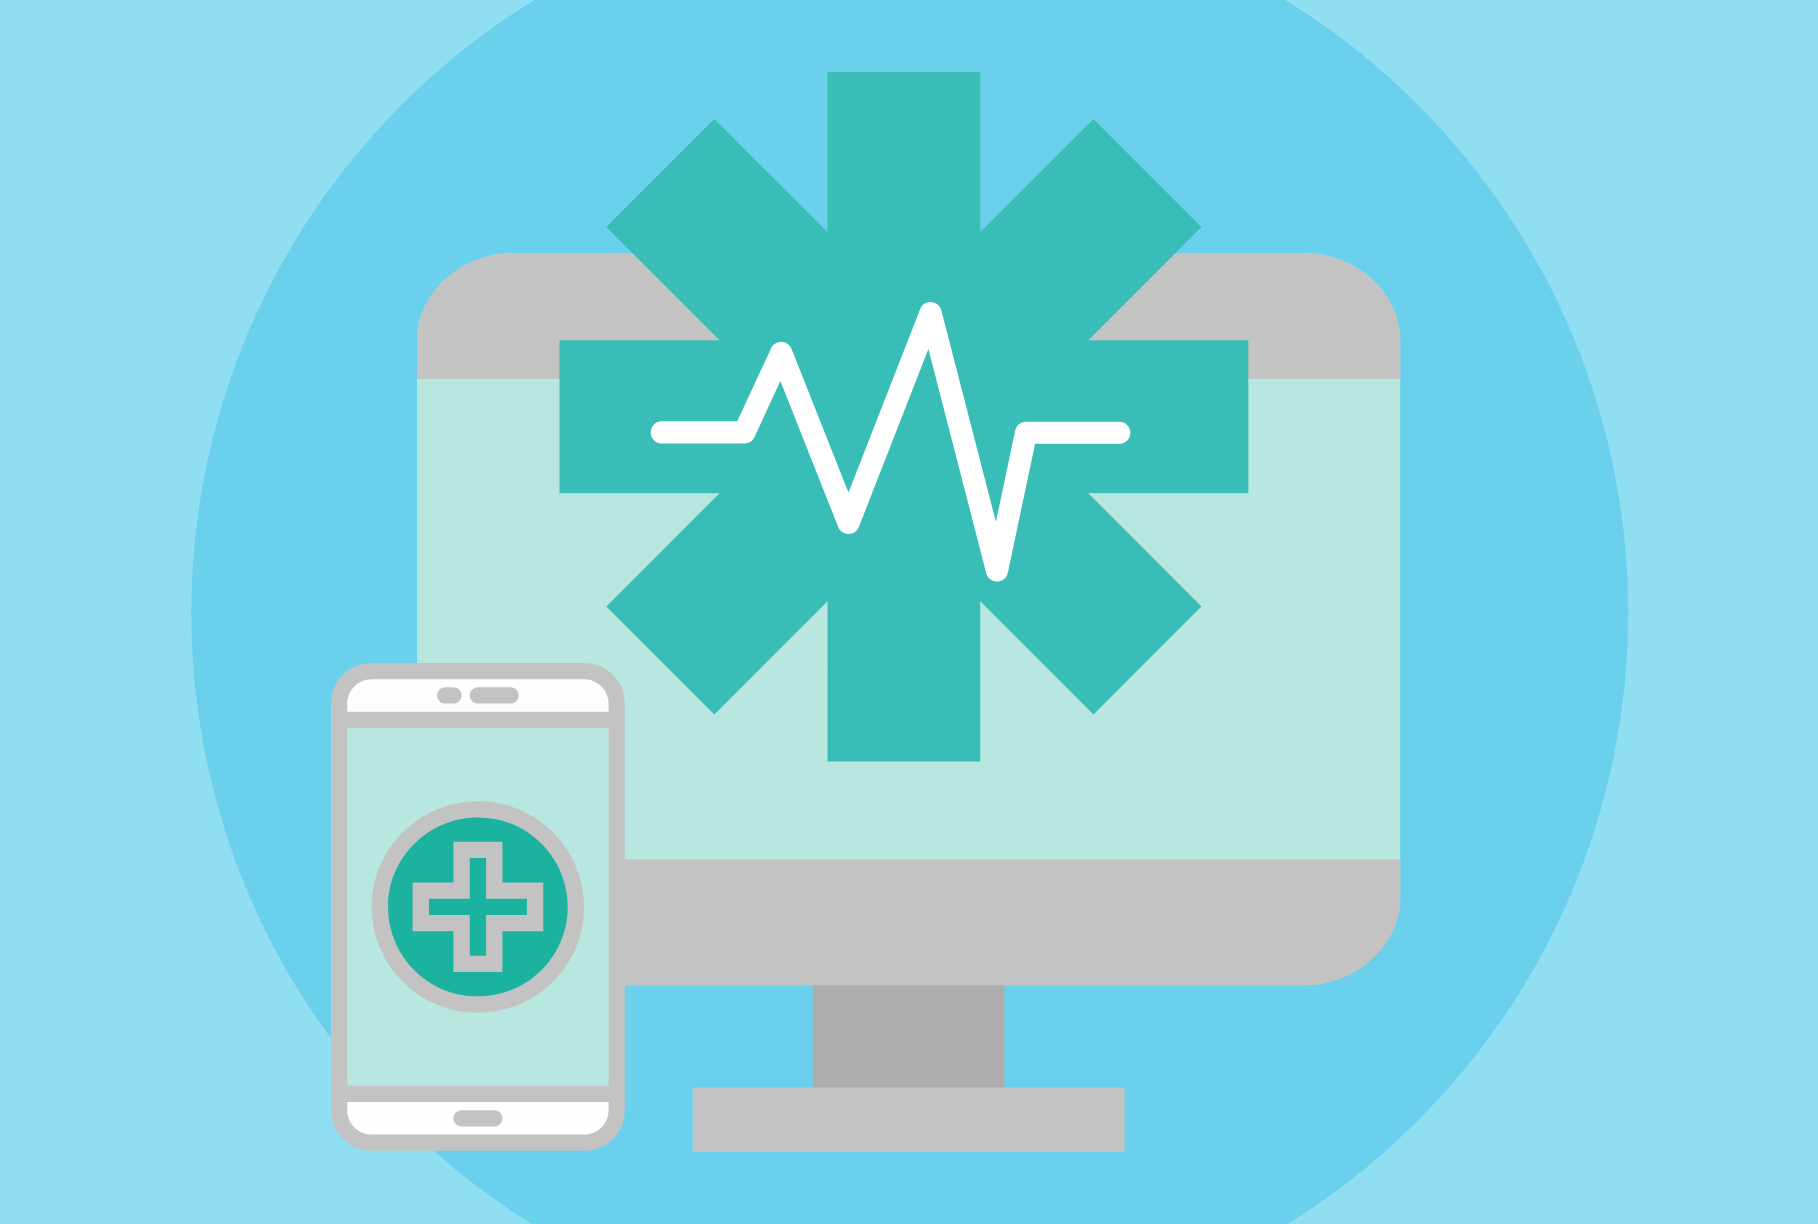 Customers Influence Significant Development in Digital Health Technology